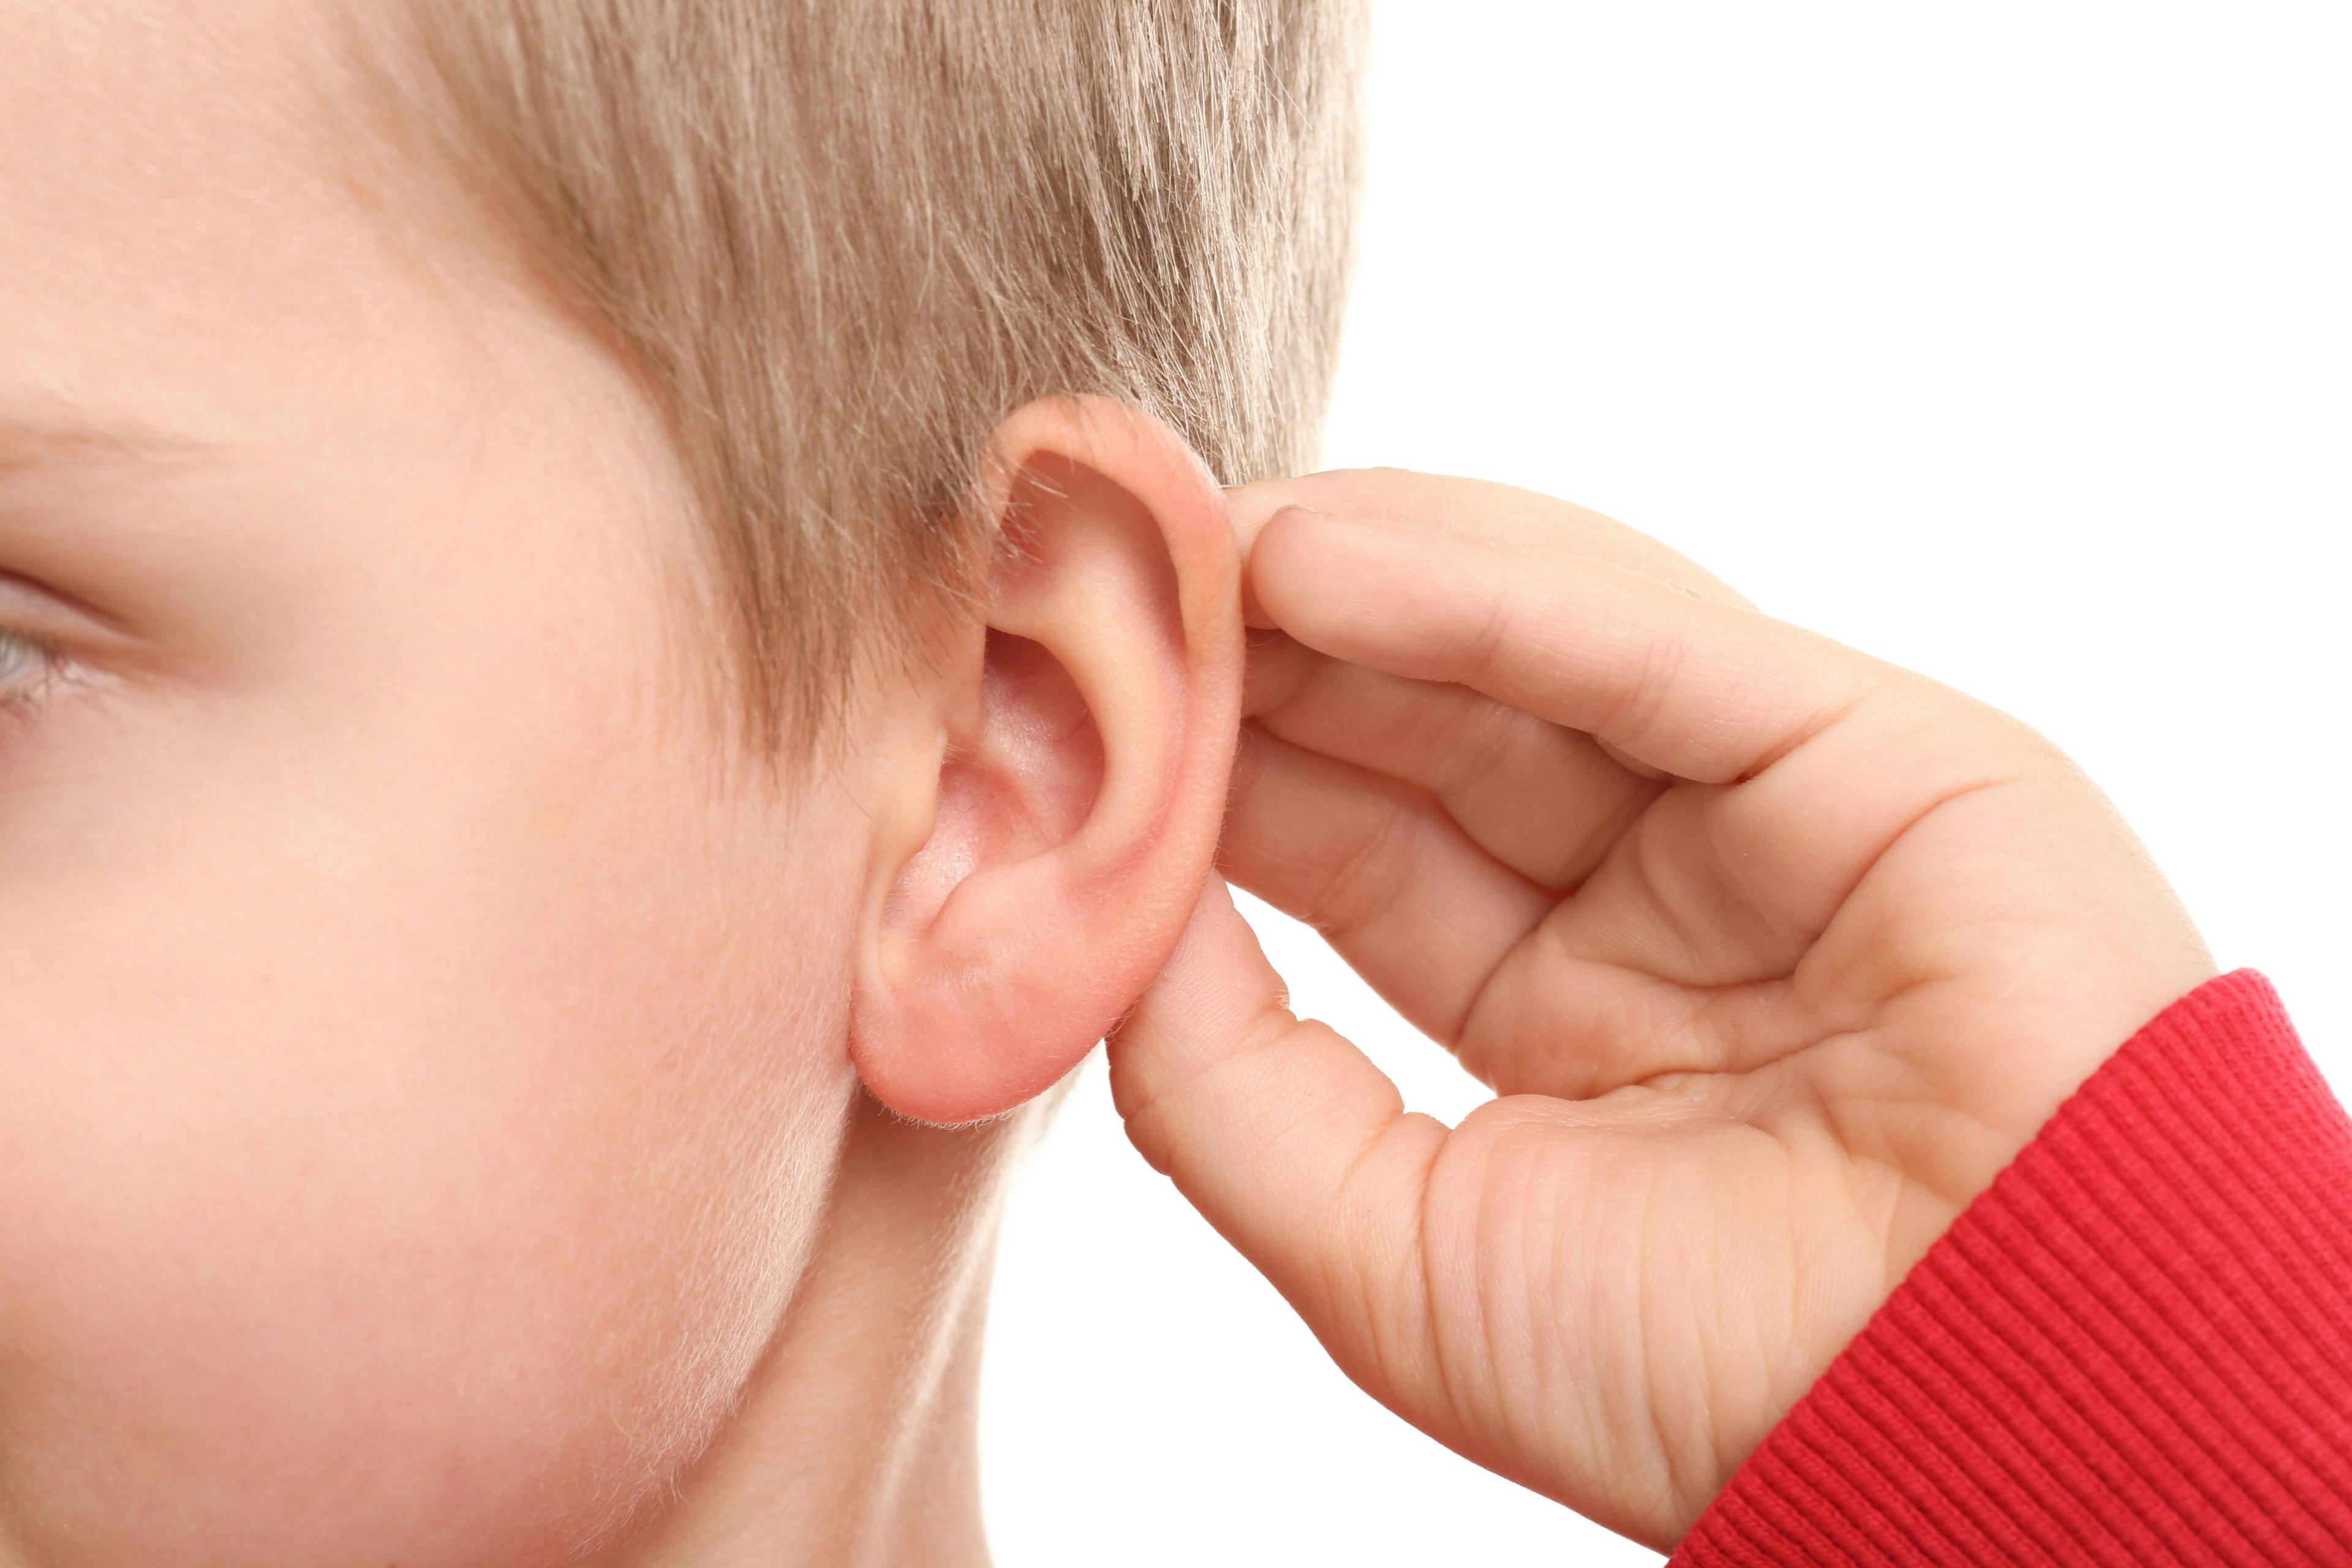 A Genetic Variant May Identify Children at Higher Risk of Chemotherapy-Induced Hearing Loss